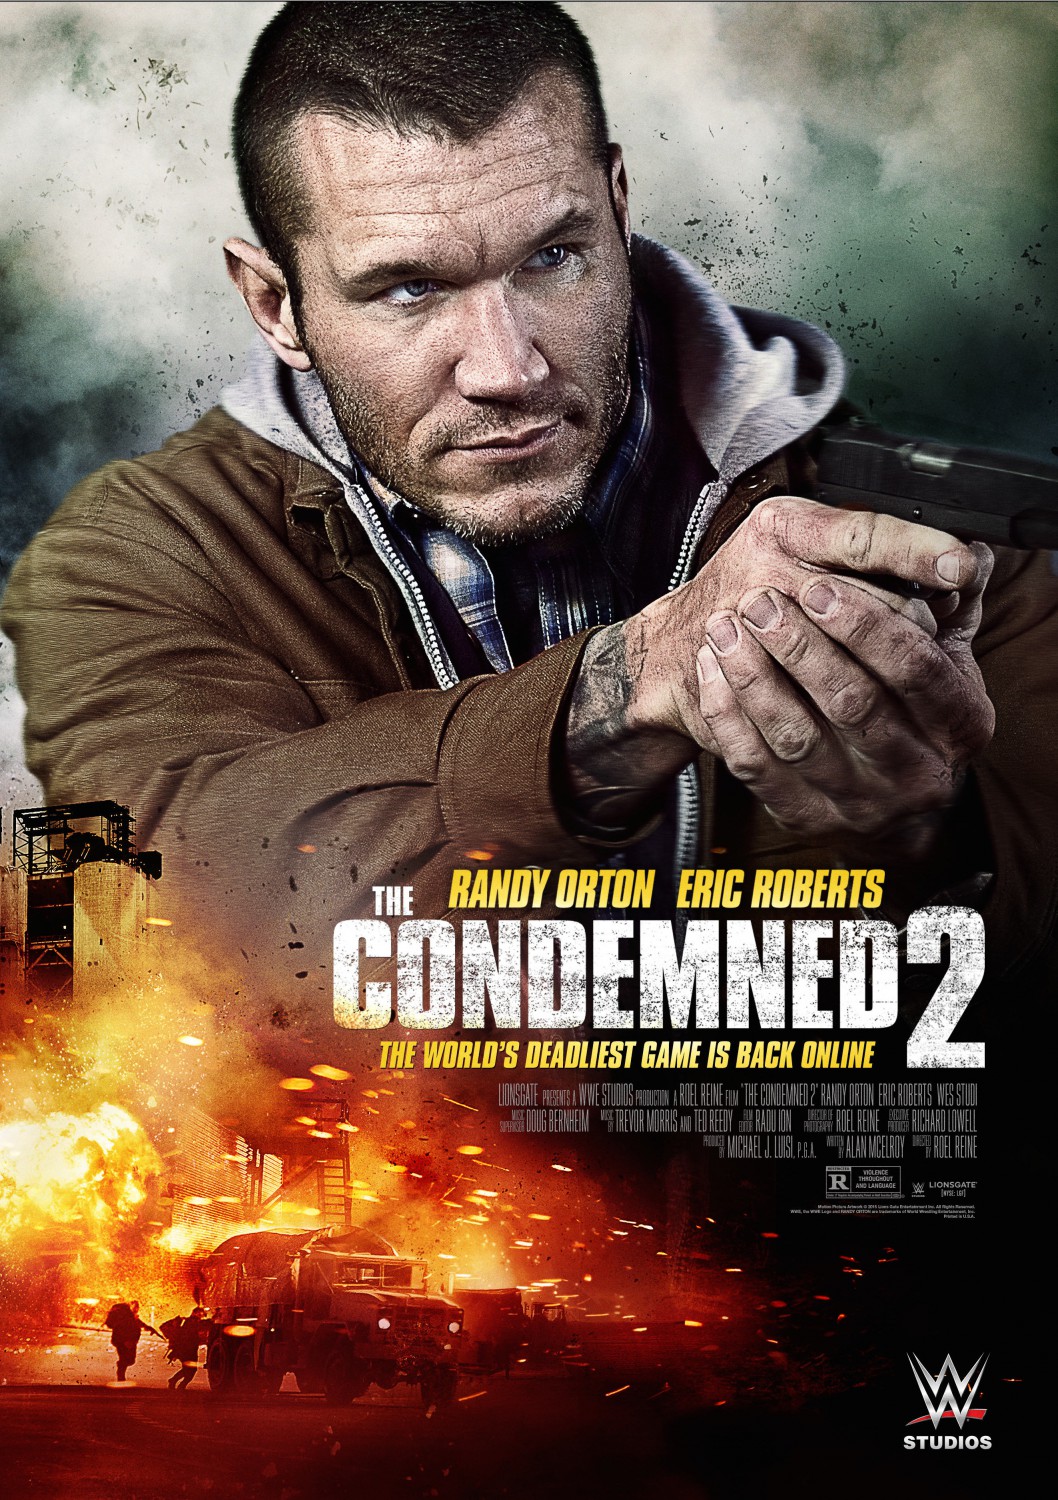 Extra Large Movie Poster Image for The Condemned 2 